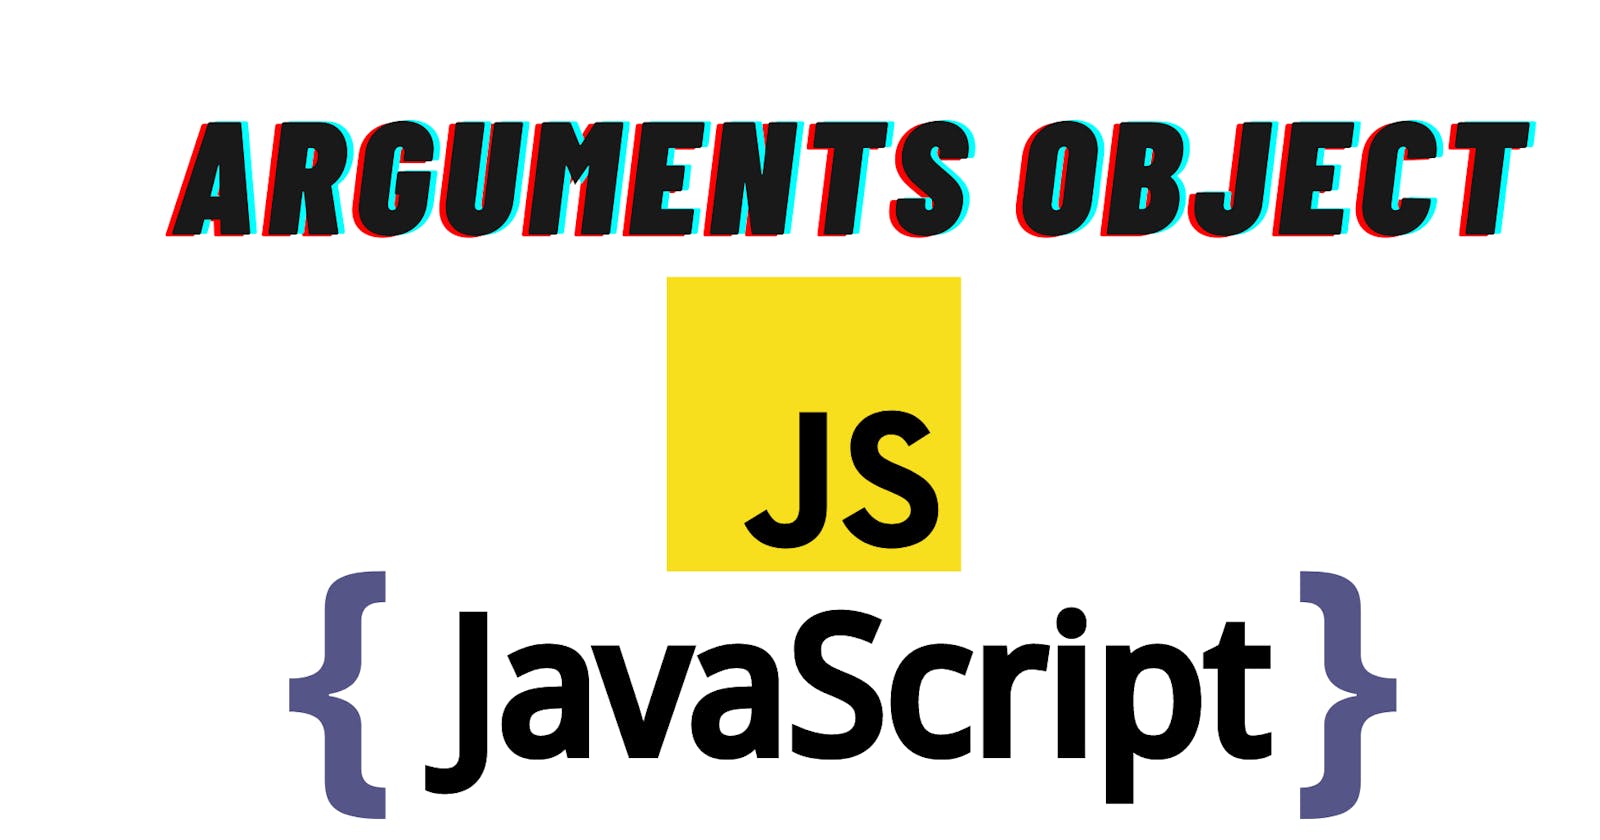 About JavaScript's arguments object and how it works..